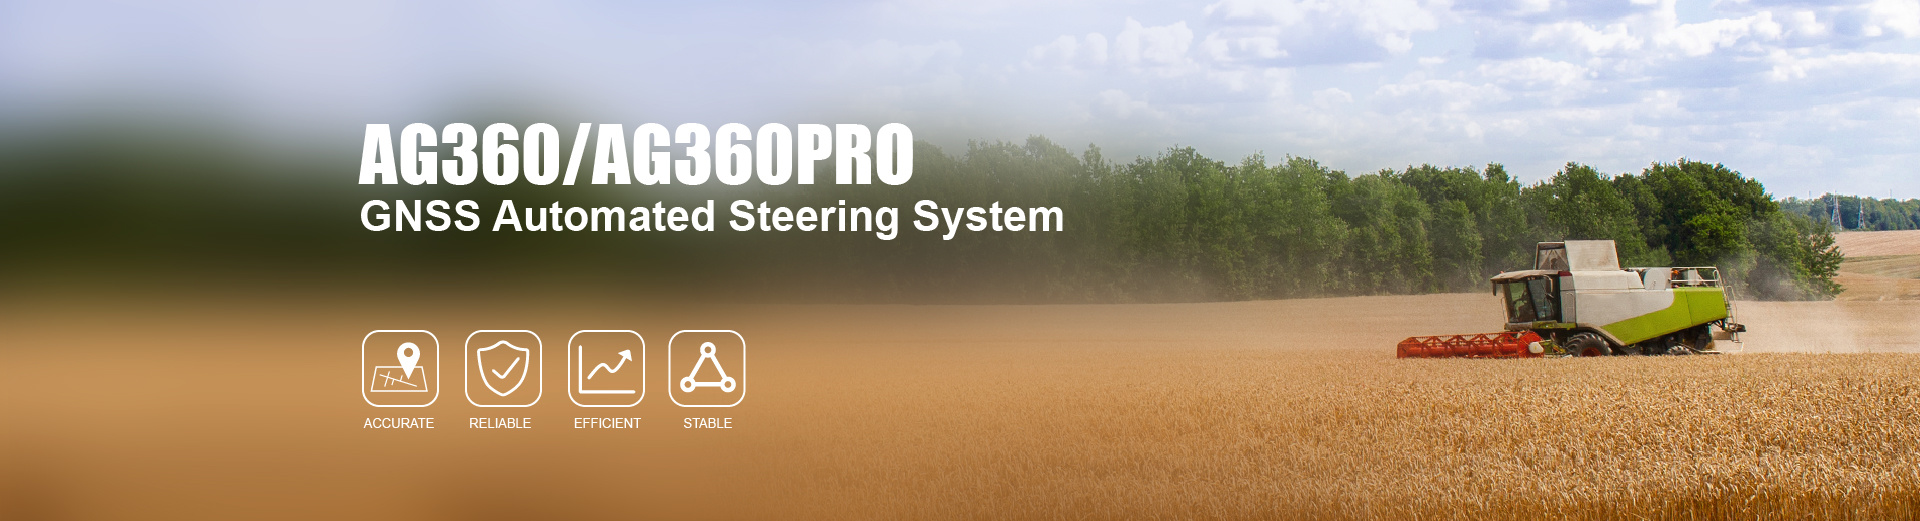 AG360/AG360 Pro Automated Steering System